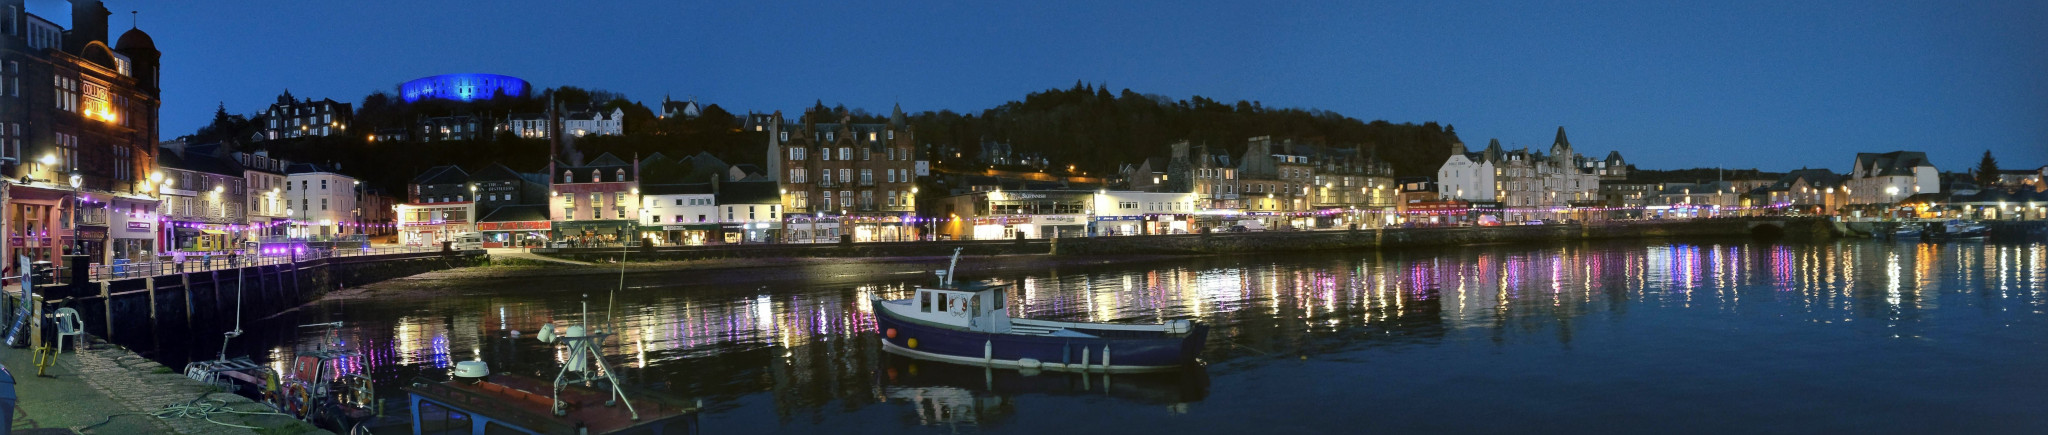 A nice panoramic of Oban, with a blue McCraig's Tower on top